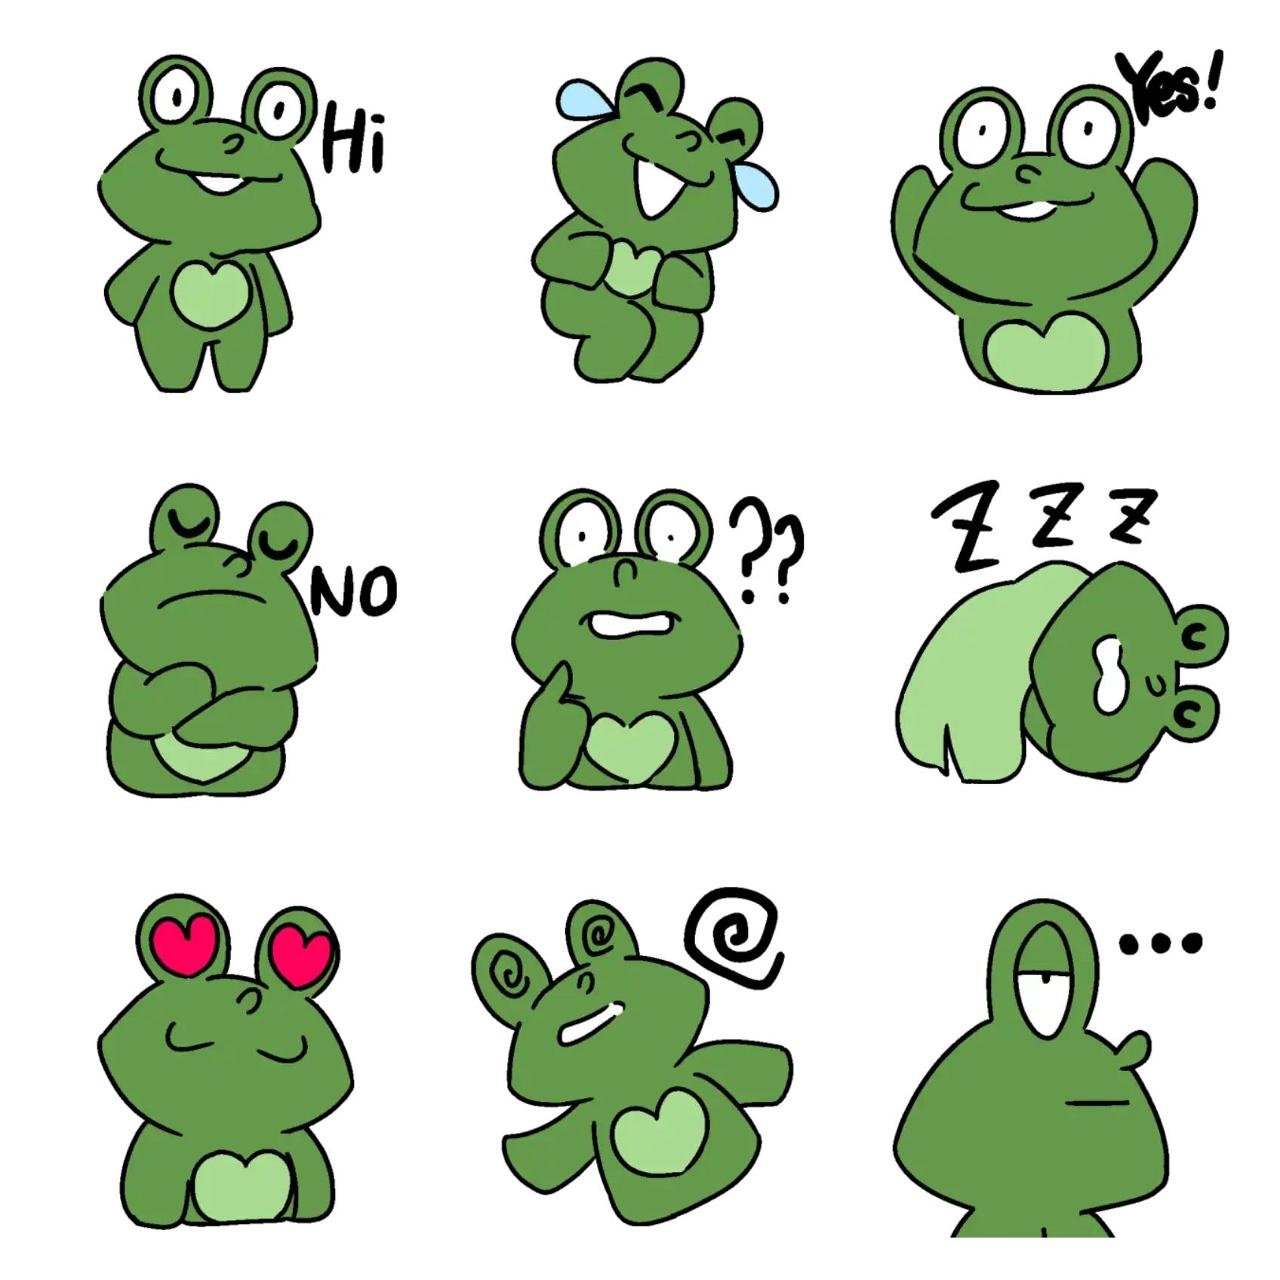 Doodle the green frog Animation/Cartoon,Animals sticker pack for Whatsapp, Telegram, Signal, and others chatting and message apps